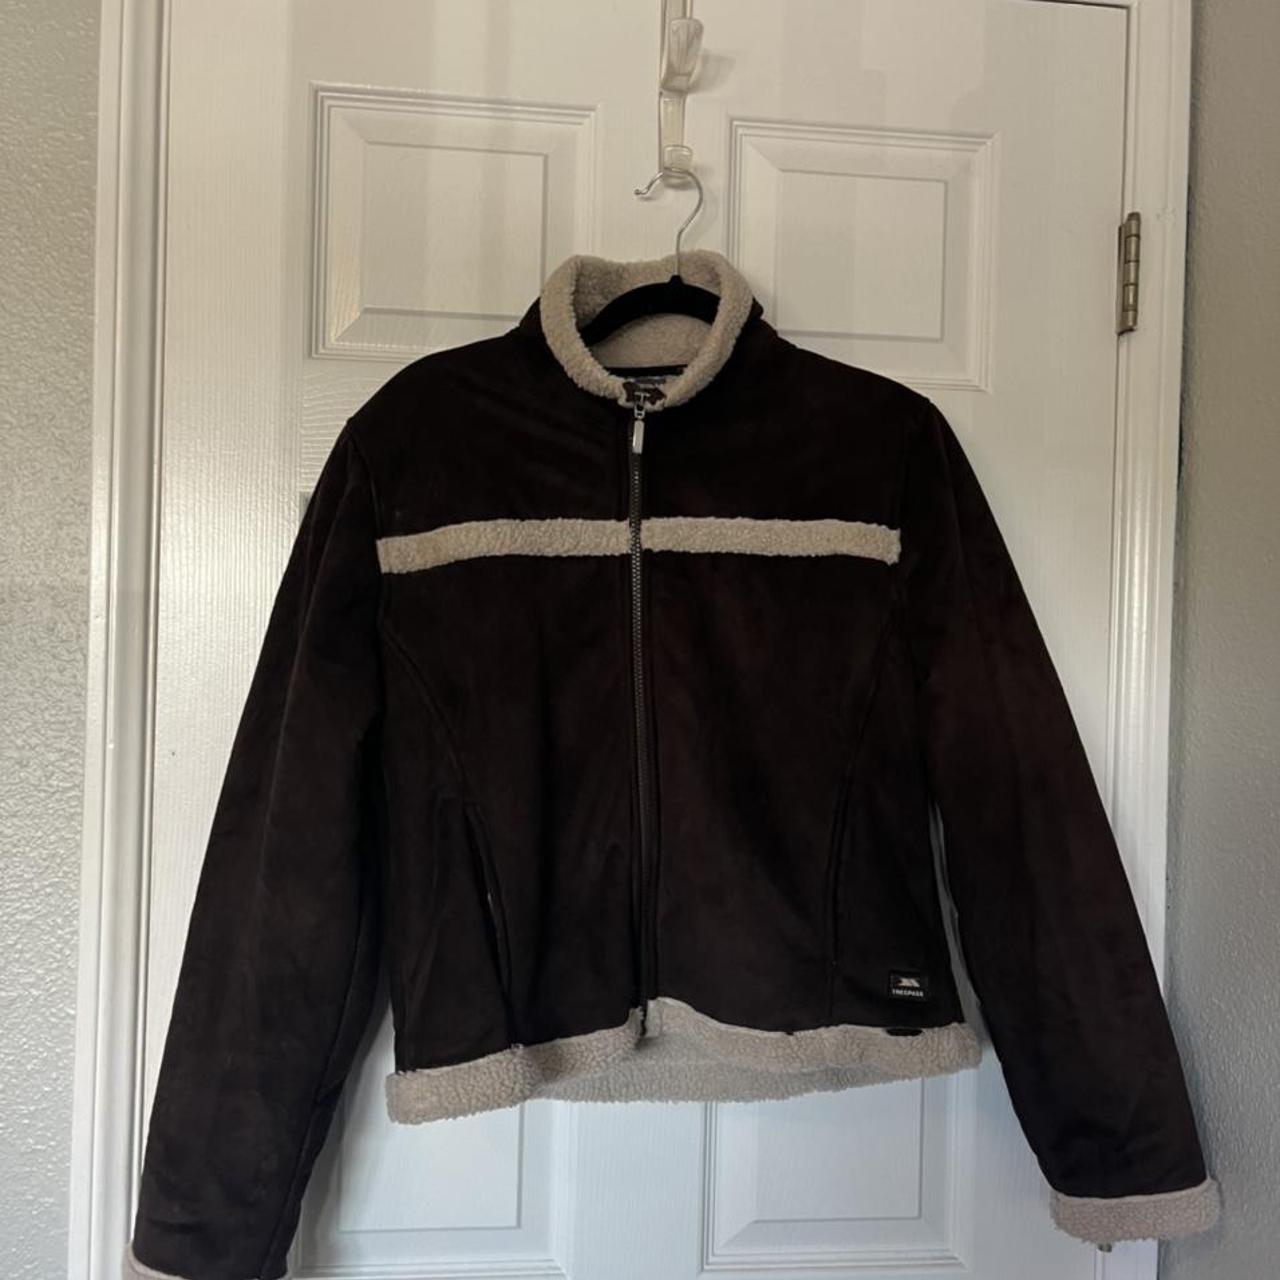 Product Image 1 - Trespass brown jacket!
Size L, fits